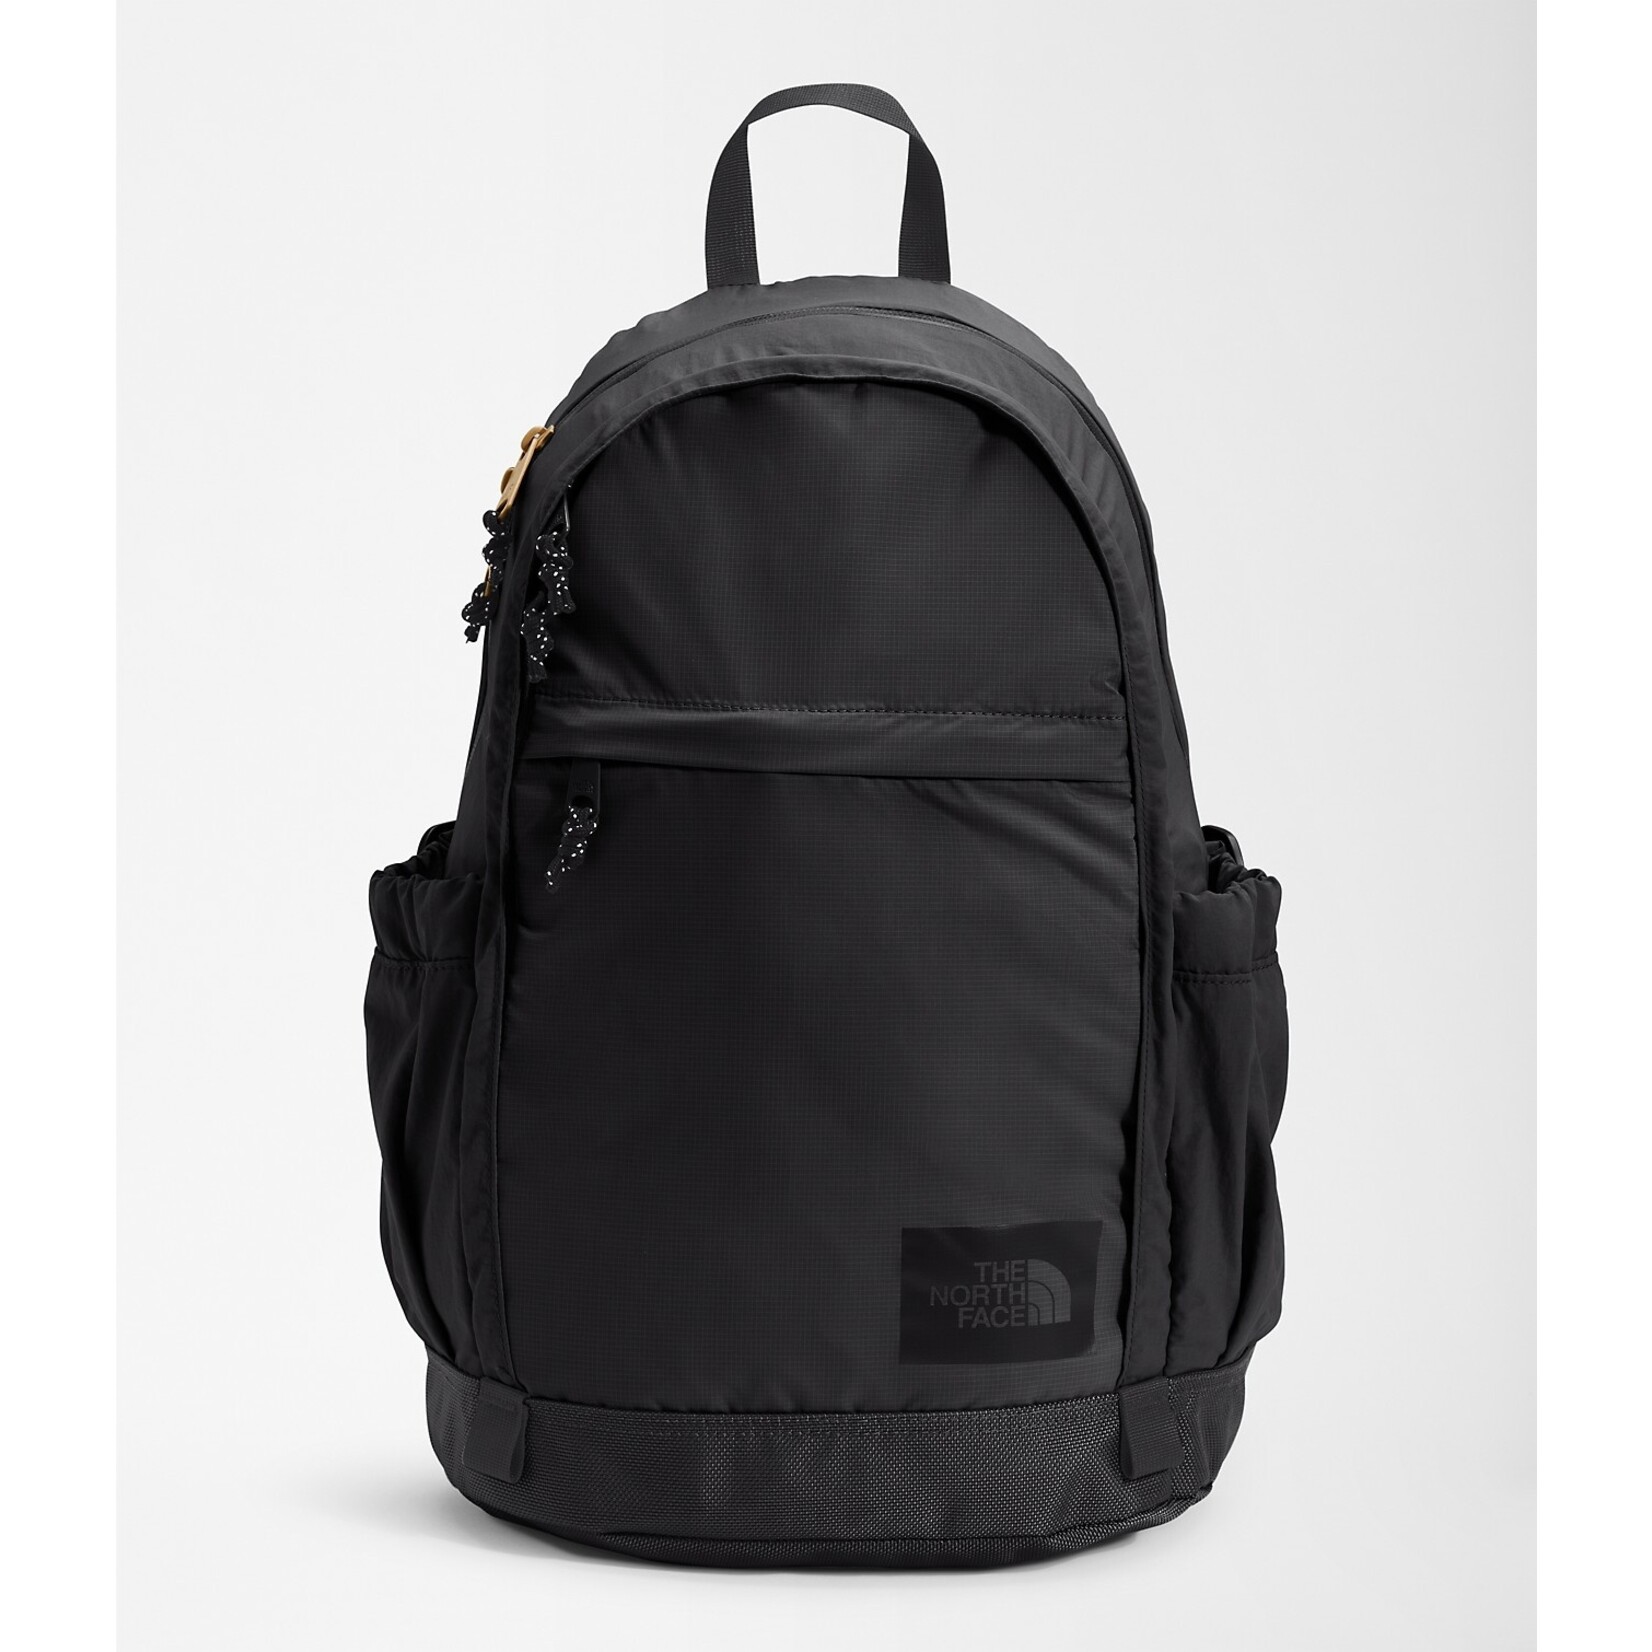 THE NORTH FACE TNF Mountain Daypack Large Black Antelope